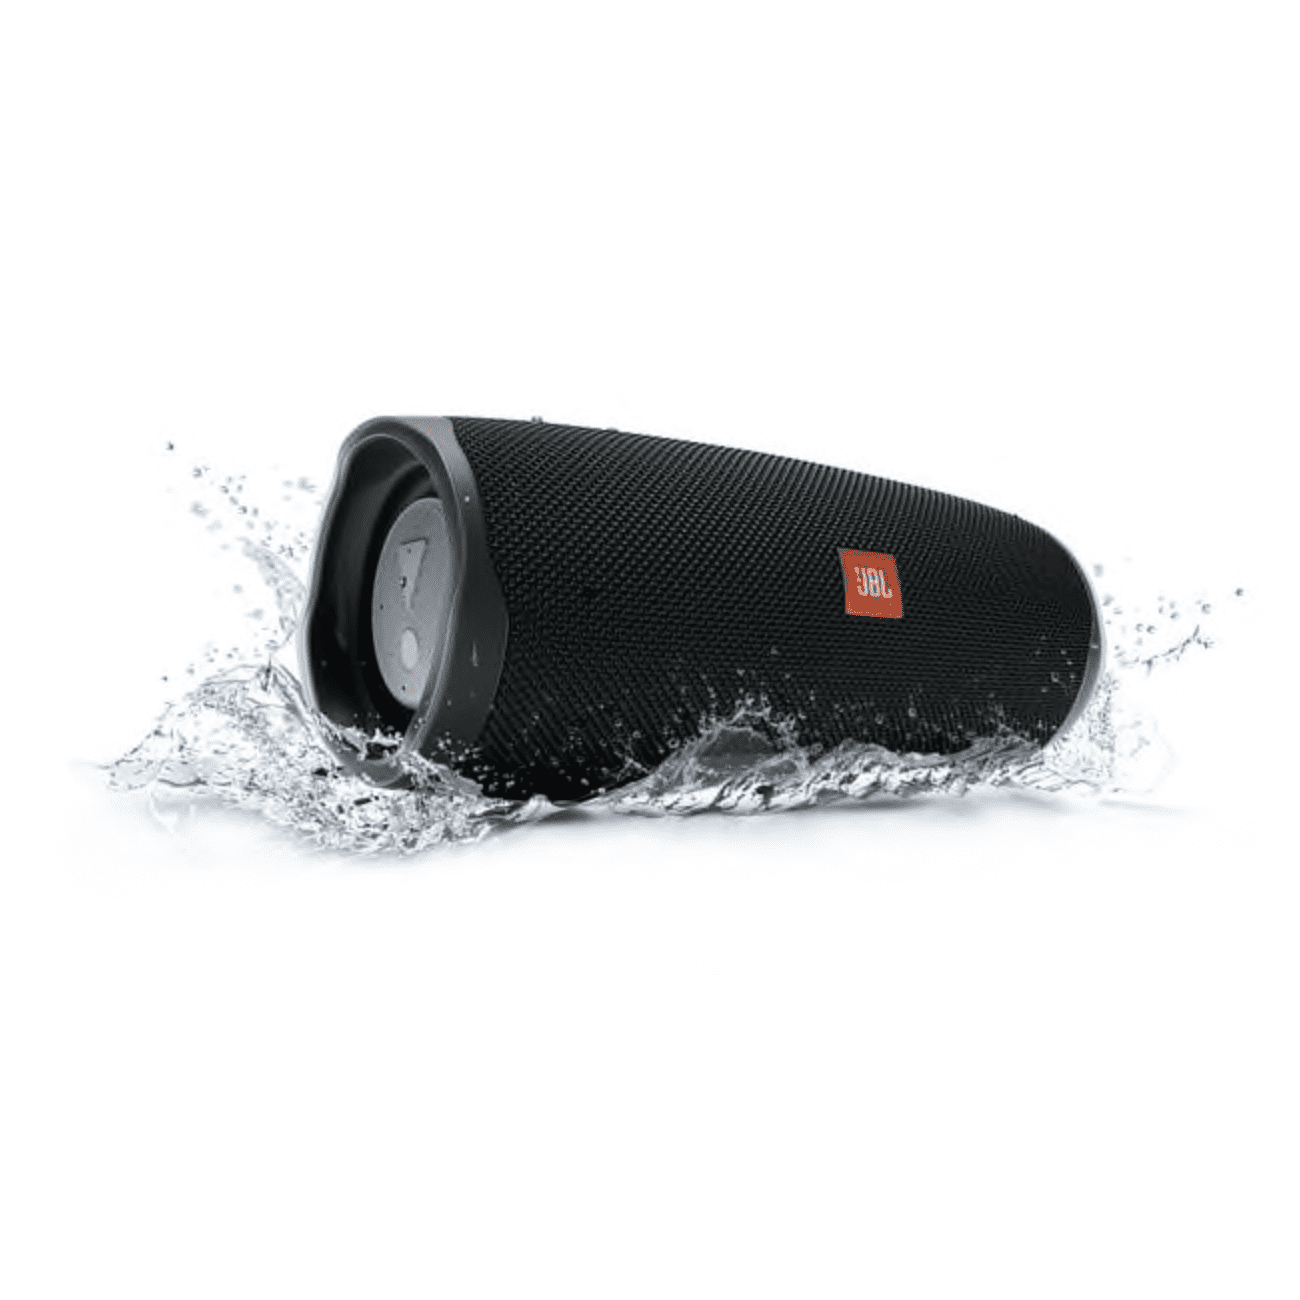 JBL CHARGE 4 Portable Bluetooth Speaker - XPRS